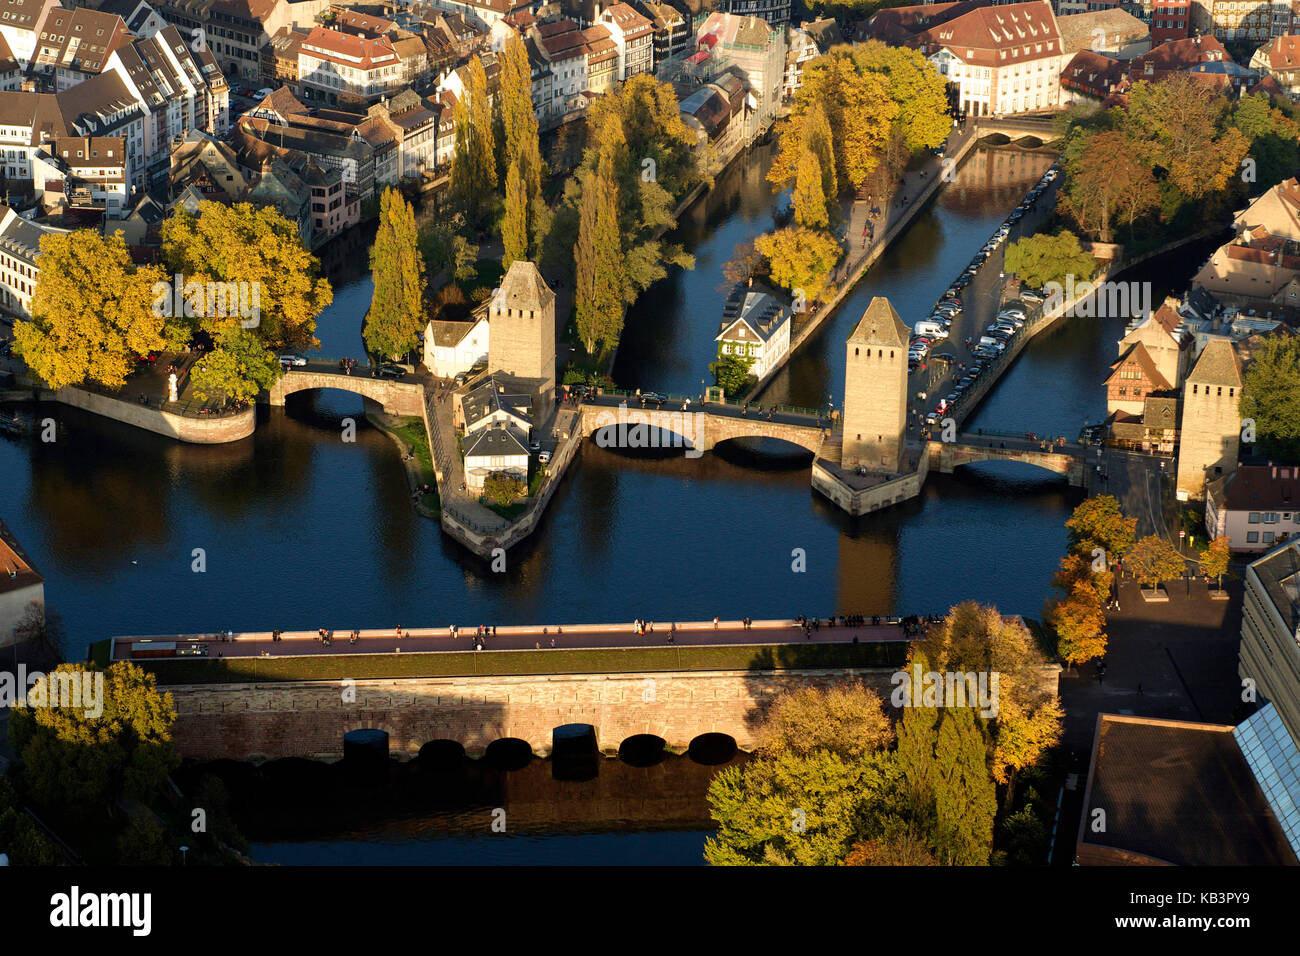 France, Bas Rhin, Strasbourg, old town listed as World Heritage by UNESCO, the Covered Bridges over the River Ill (air sight) Stock Photo